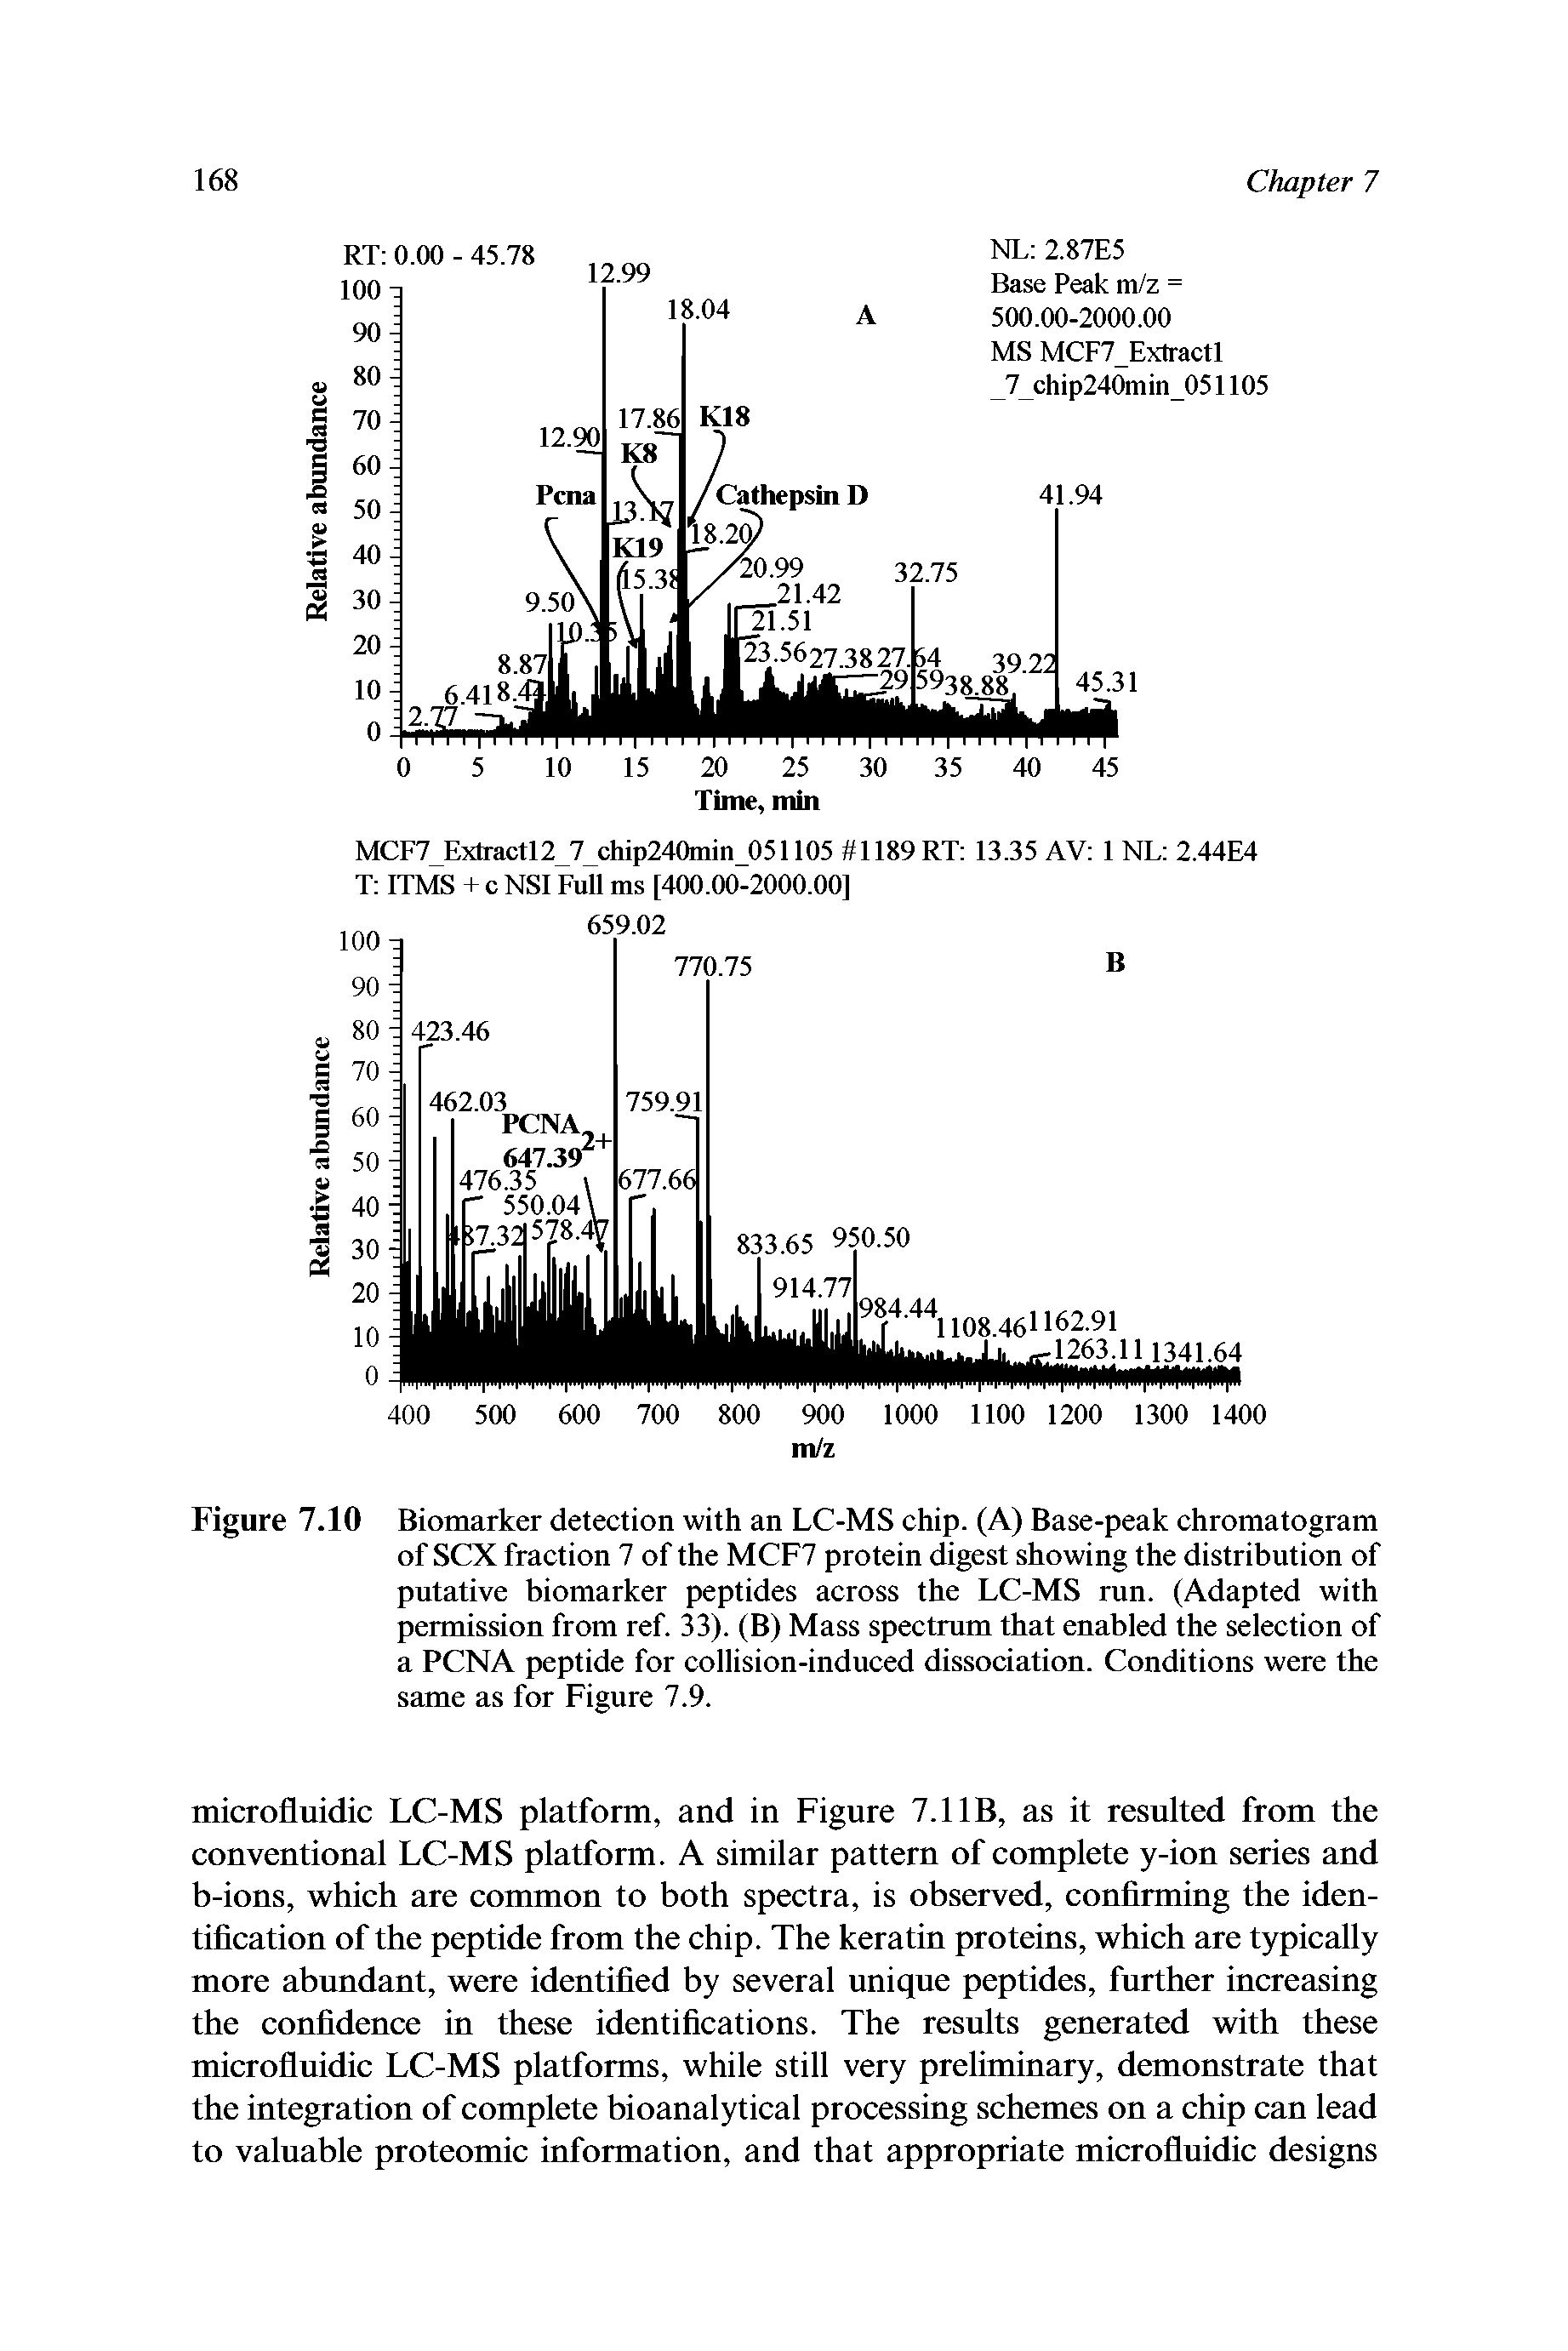 Figure 7.10 Biomarker detection with an LC-MS chip. (A) Base-peak chromatogram of SCX fraction 7 of the MCF7 protein digest showing the distribution of putative biomarker peptides across the LC-MS run. (Adapted with permission from ref. 33). (B) Mass spectrum that enabled the selection of a PCNA peptide for collision-induced dissociation. Conditions were the same as for Figure 7.9.